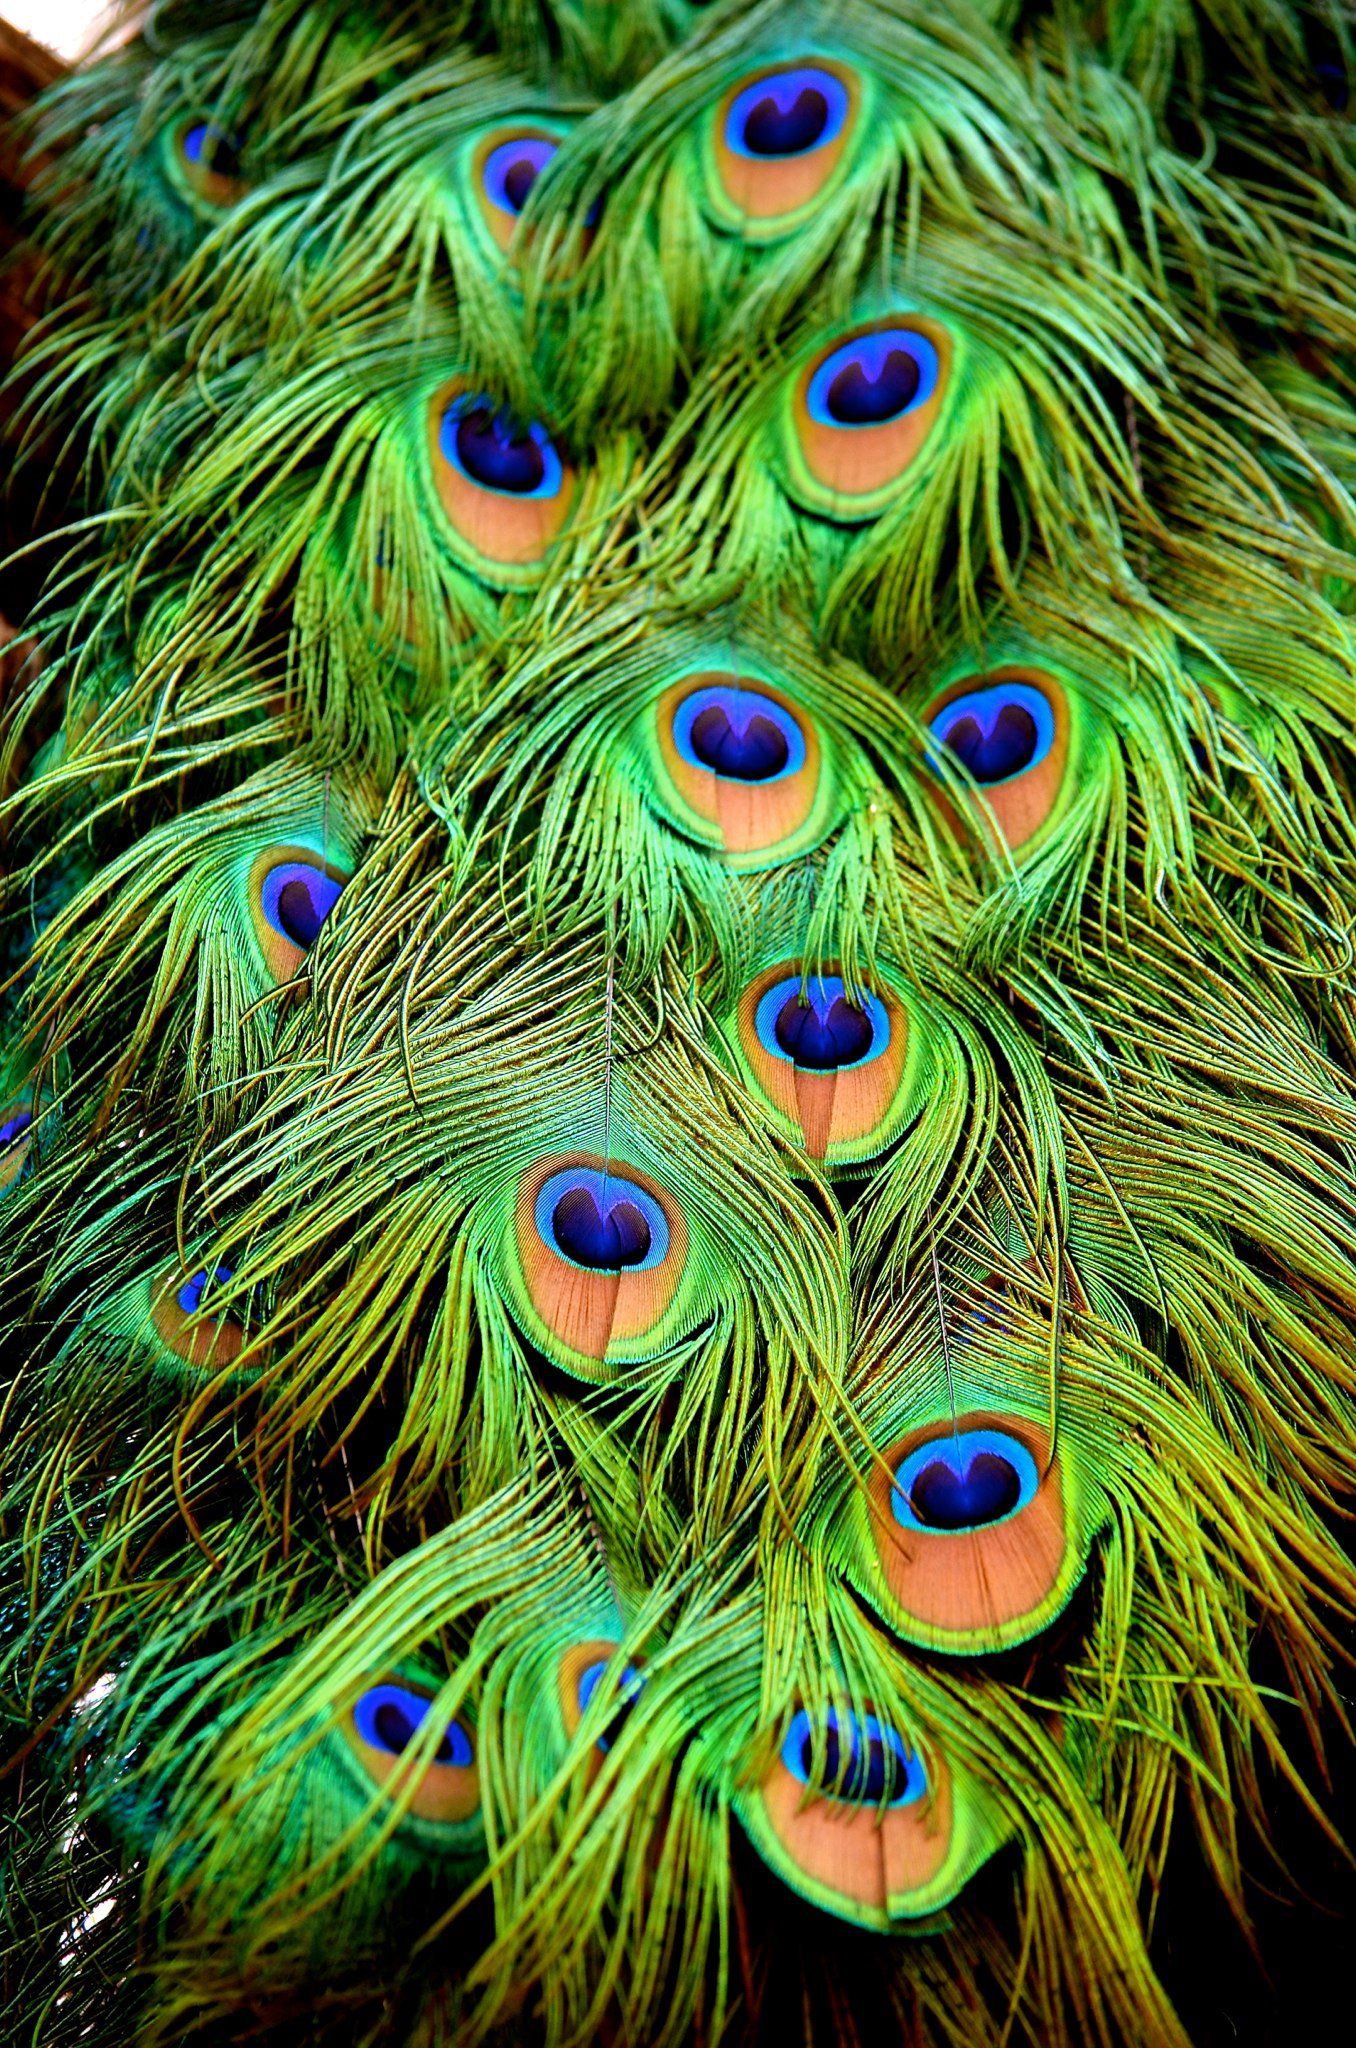 Peacock Feathers (close up) Phoenix Zoo | Peacock | Pinterest ...